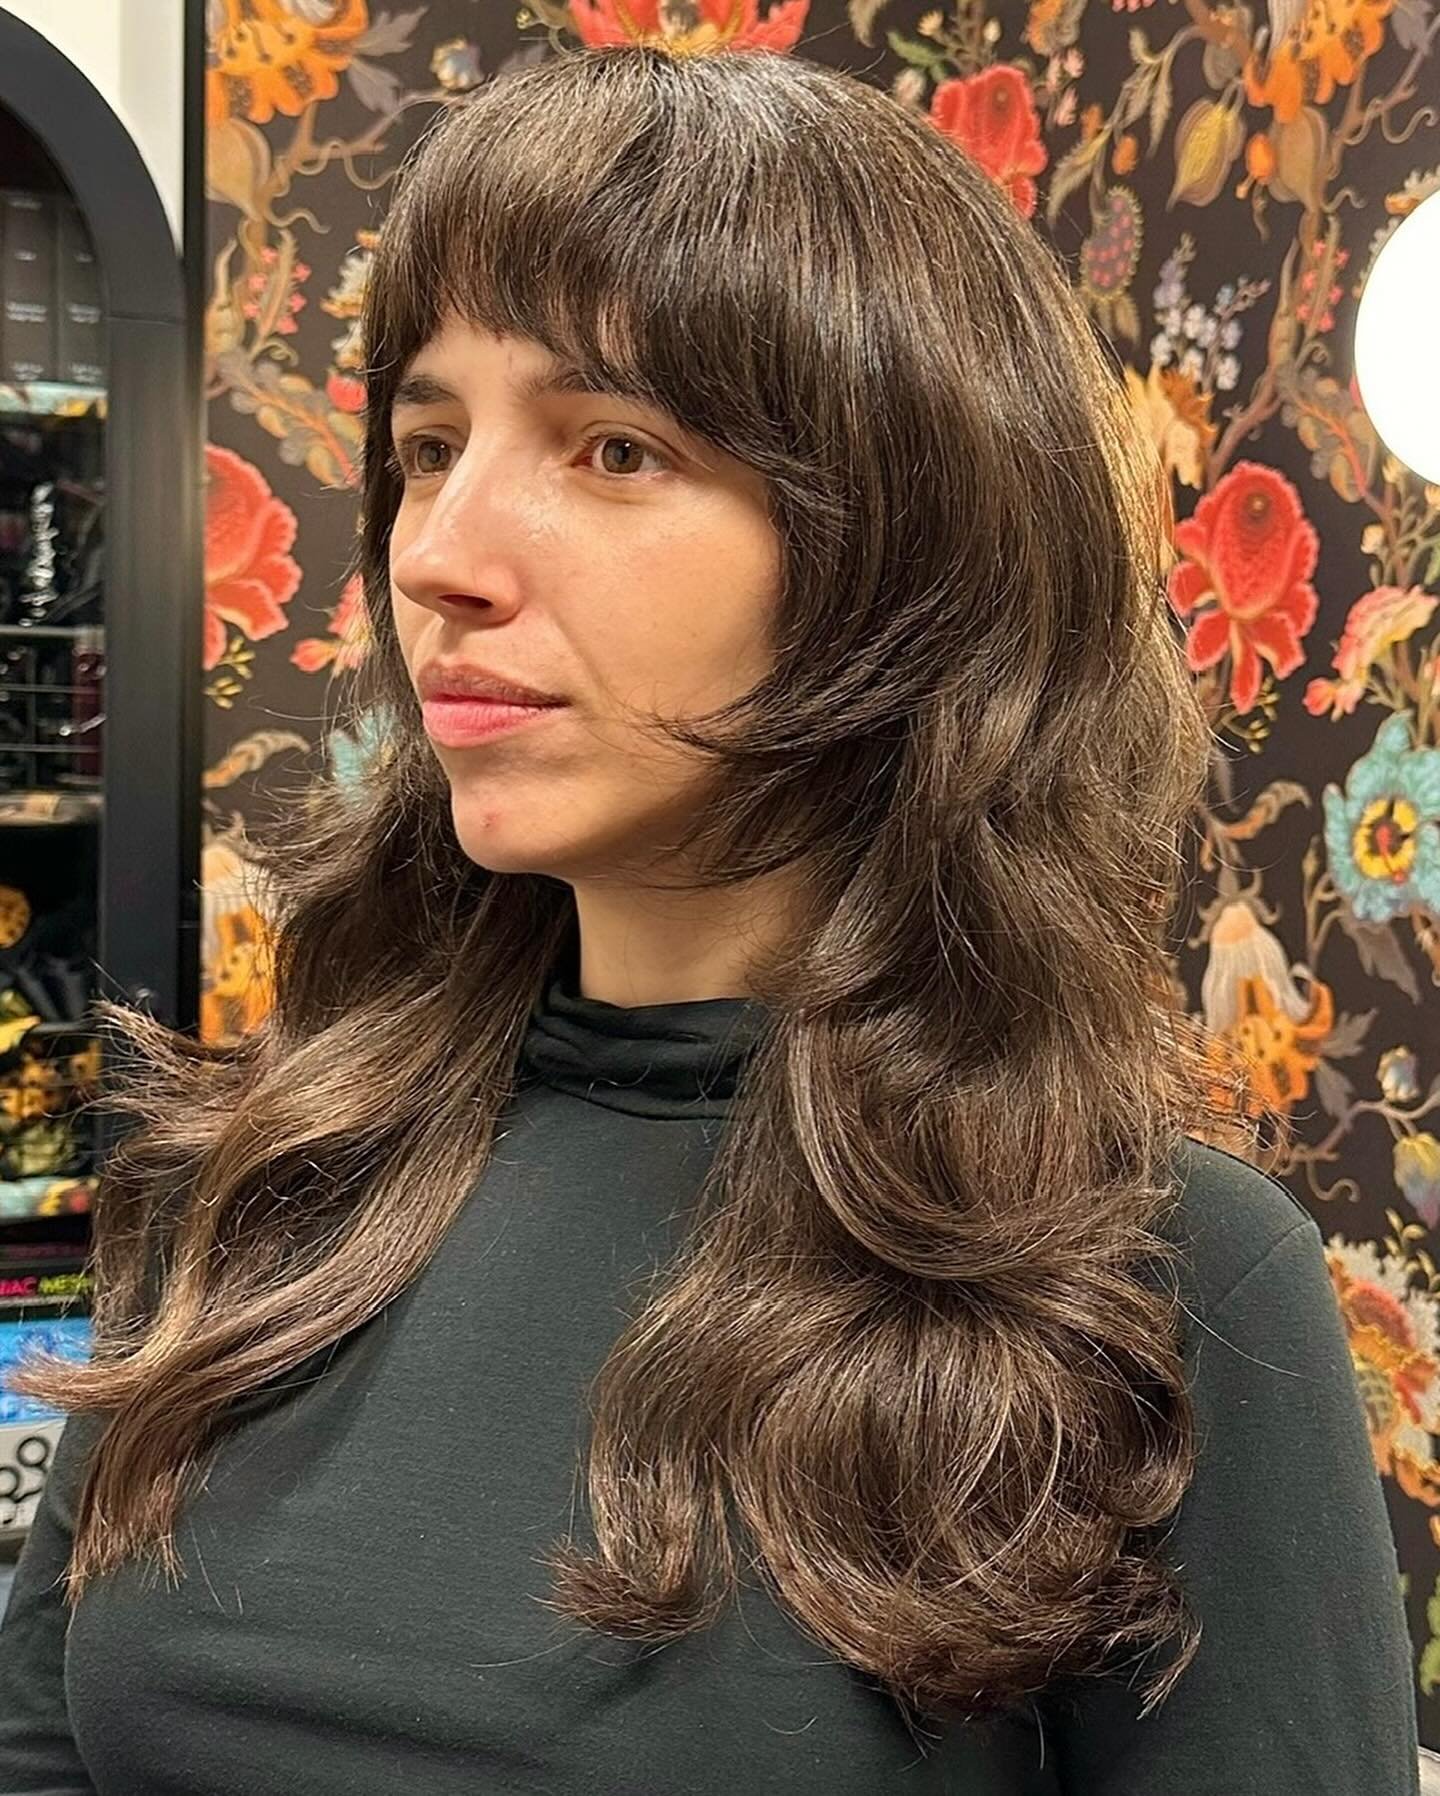 Dreamy hair 🥹 A little brighter with pops of caramel pieces and soft wispy layers✂️&hearts;️

#whispyhair#shaghaircut#whispylayers#trendyhair#hairtrends#foilyagehair#caramelhair#fringe#bighair

#nychairstylist#nychaircolorist#manhattanhairstylist#ma